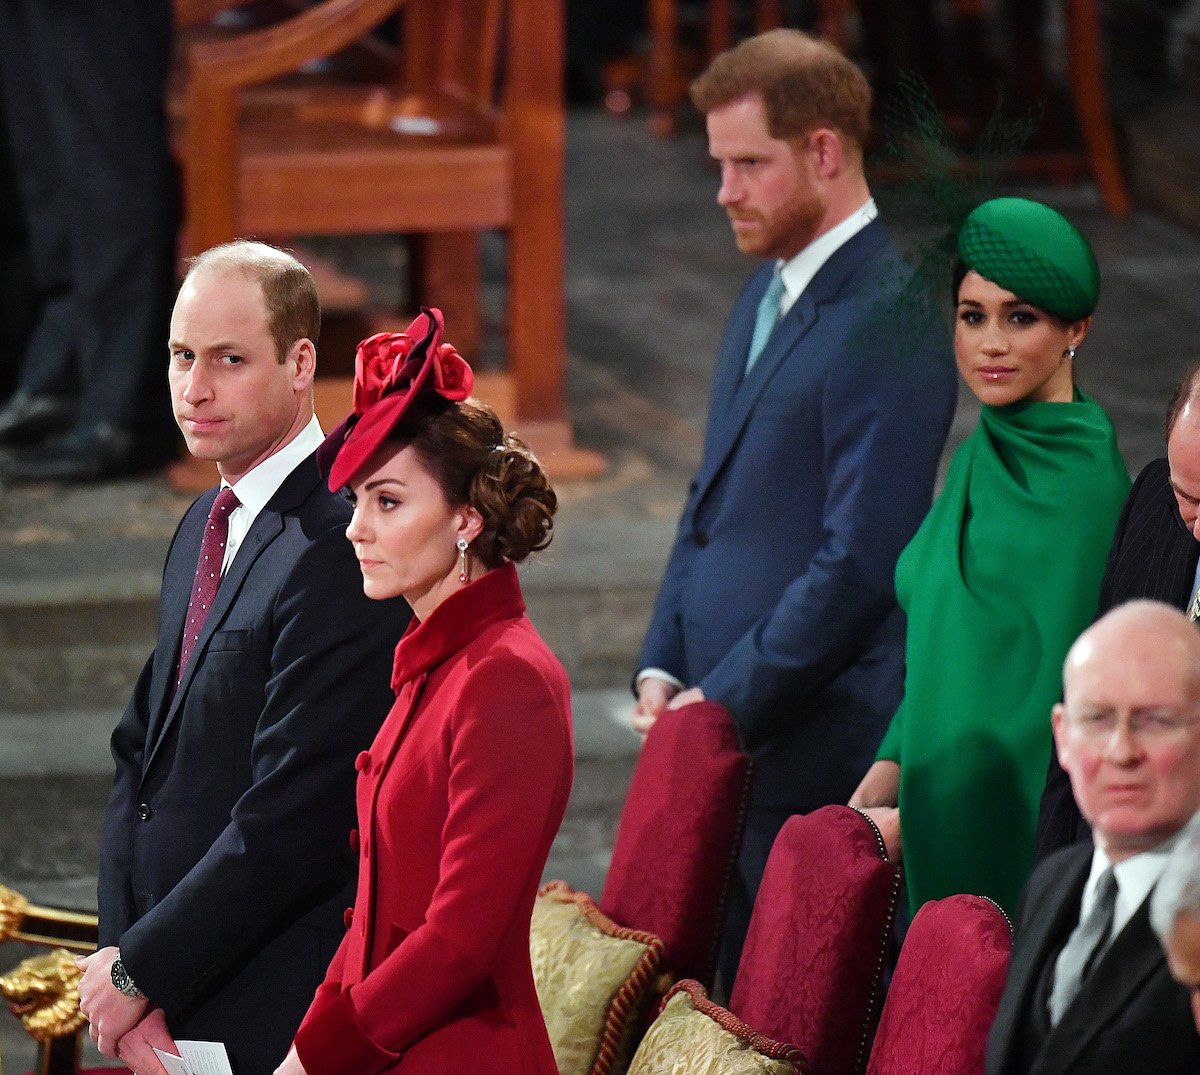 Prince William and Prince Harry sit one row apart with Kate Middleton and Meghan Markle